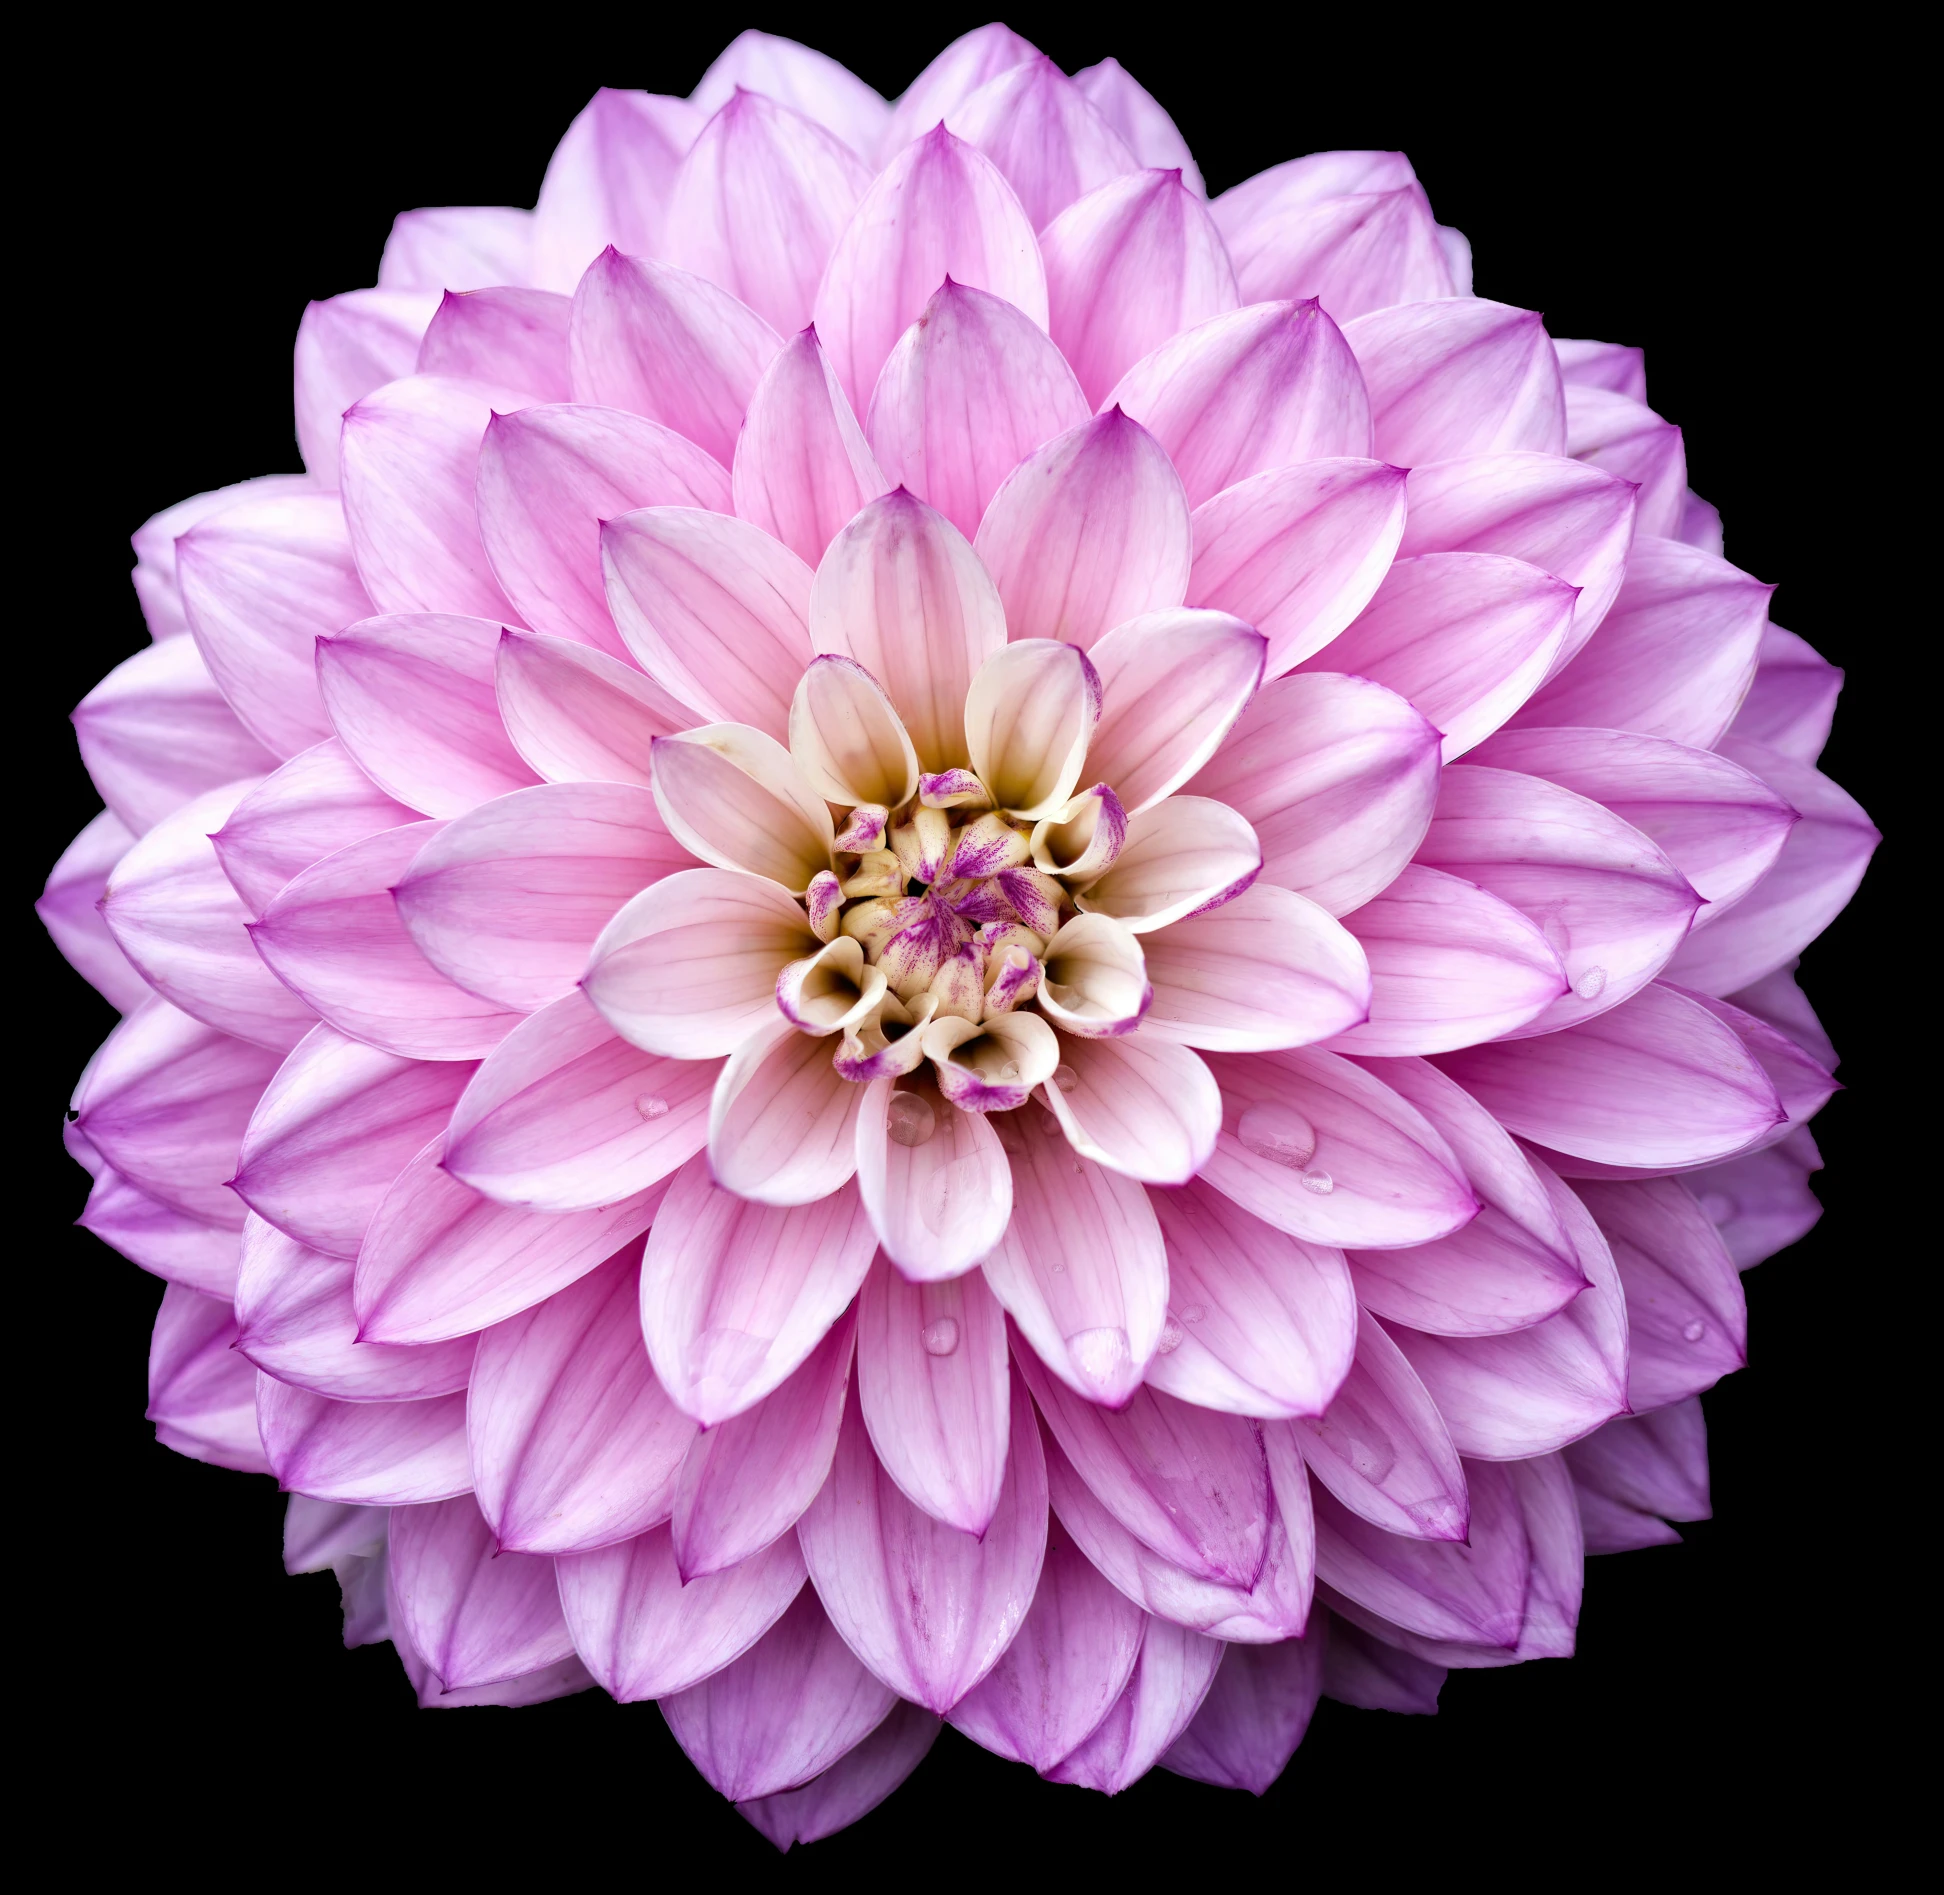 a large flower with very pretty petals sitting in the center of the pograph